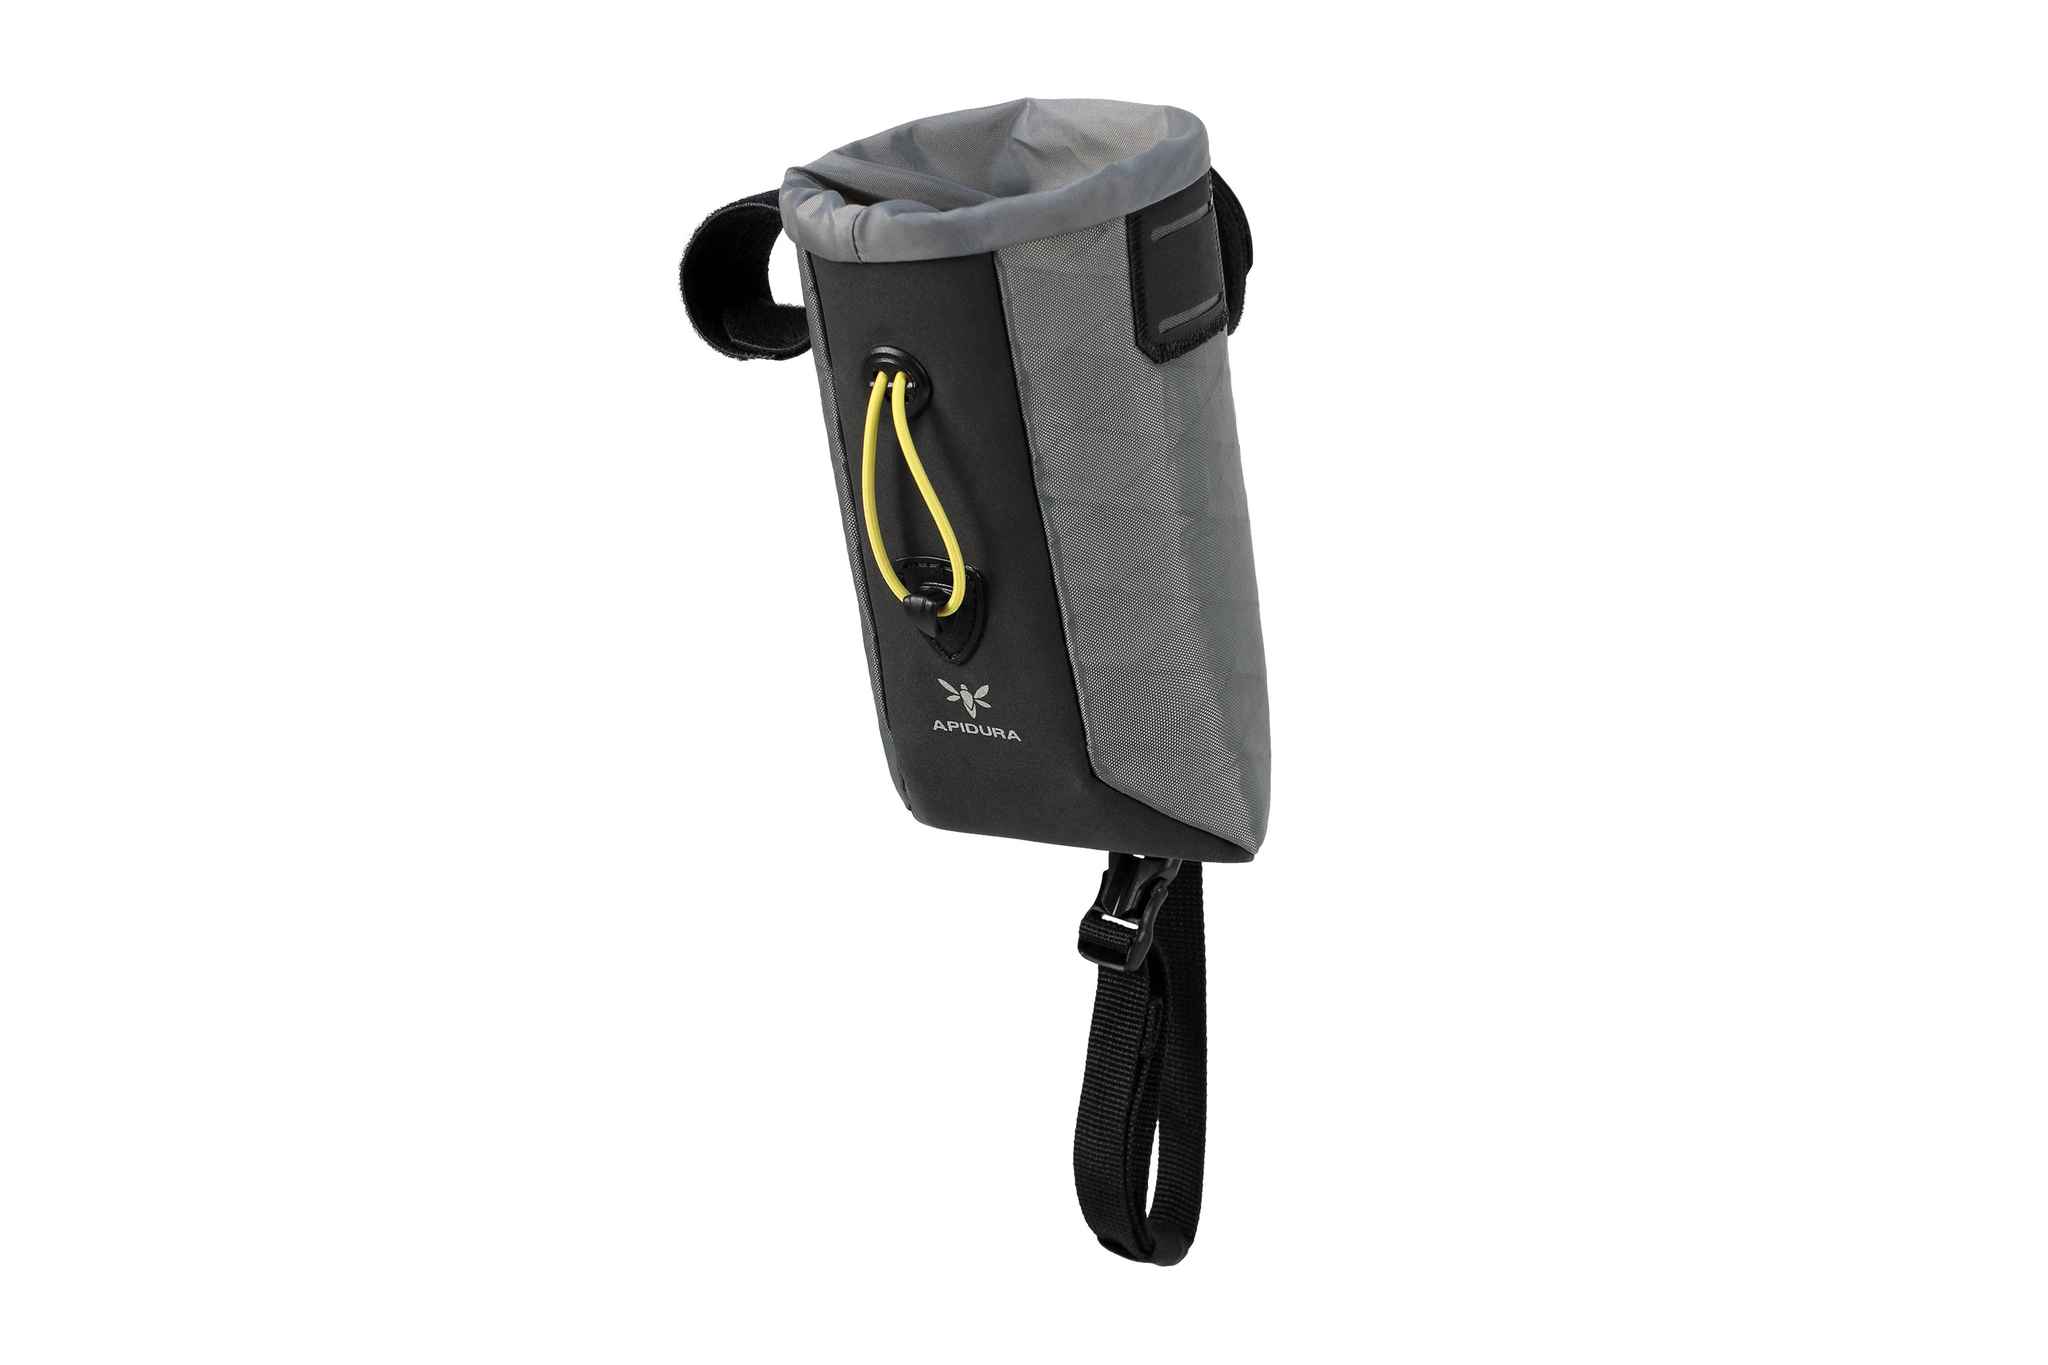 BACKCOUNTRY FOOD POUCH 0.8L - Hauptansicht